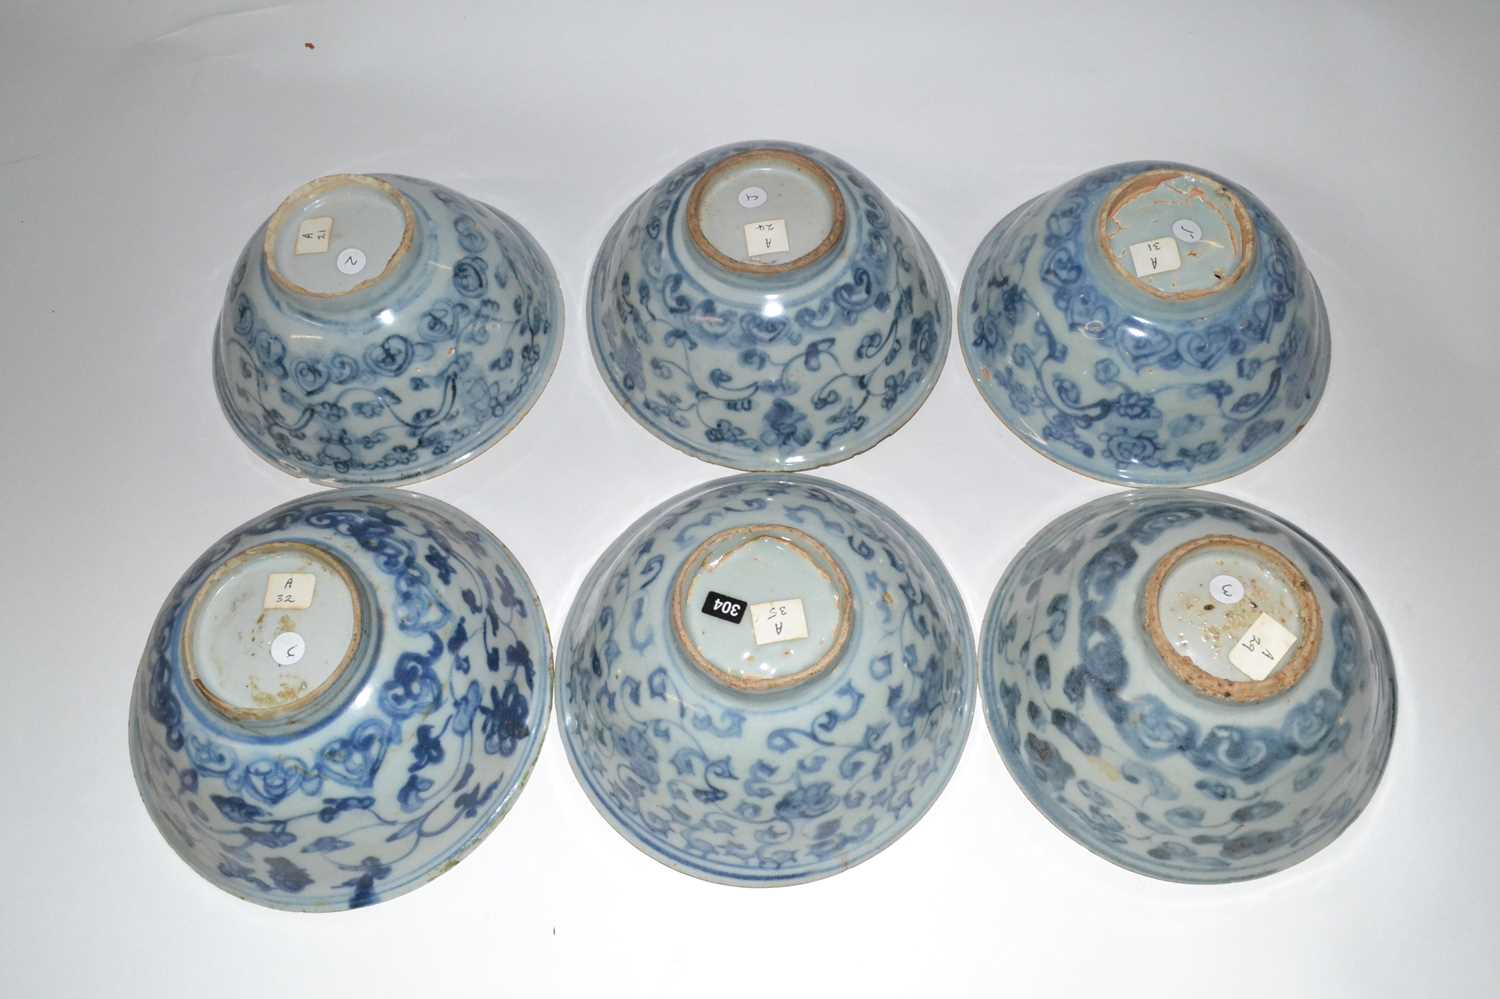 A group of six Chinese porcelain bowls with Ming Dynasty type designs, 14cm diameter (Inventory - Image 3 of 3